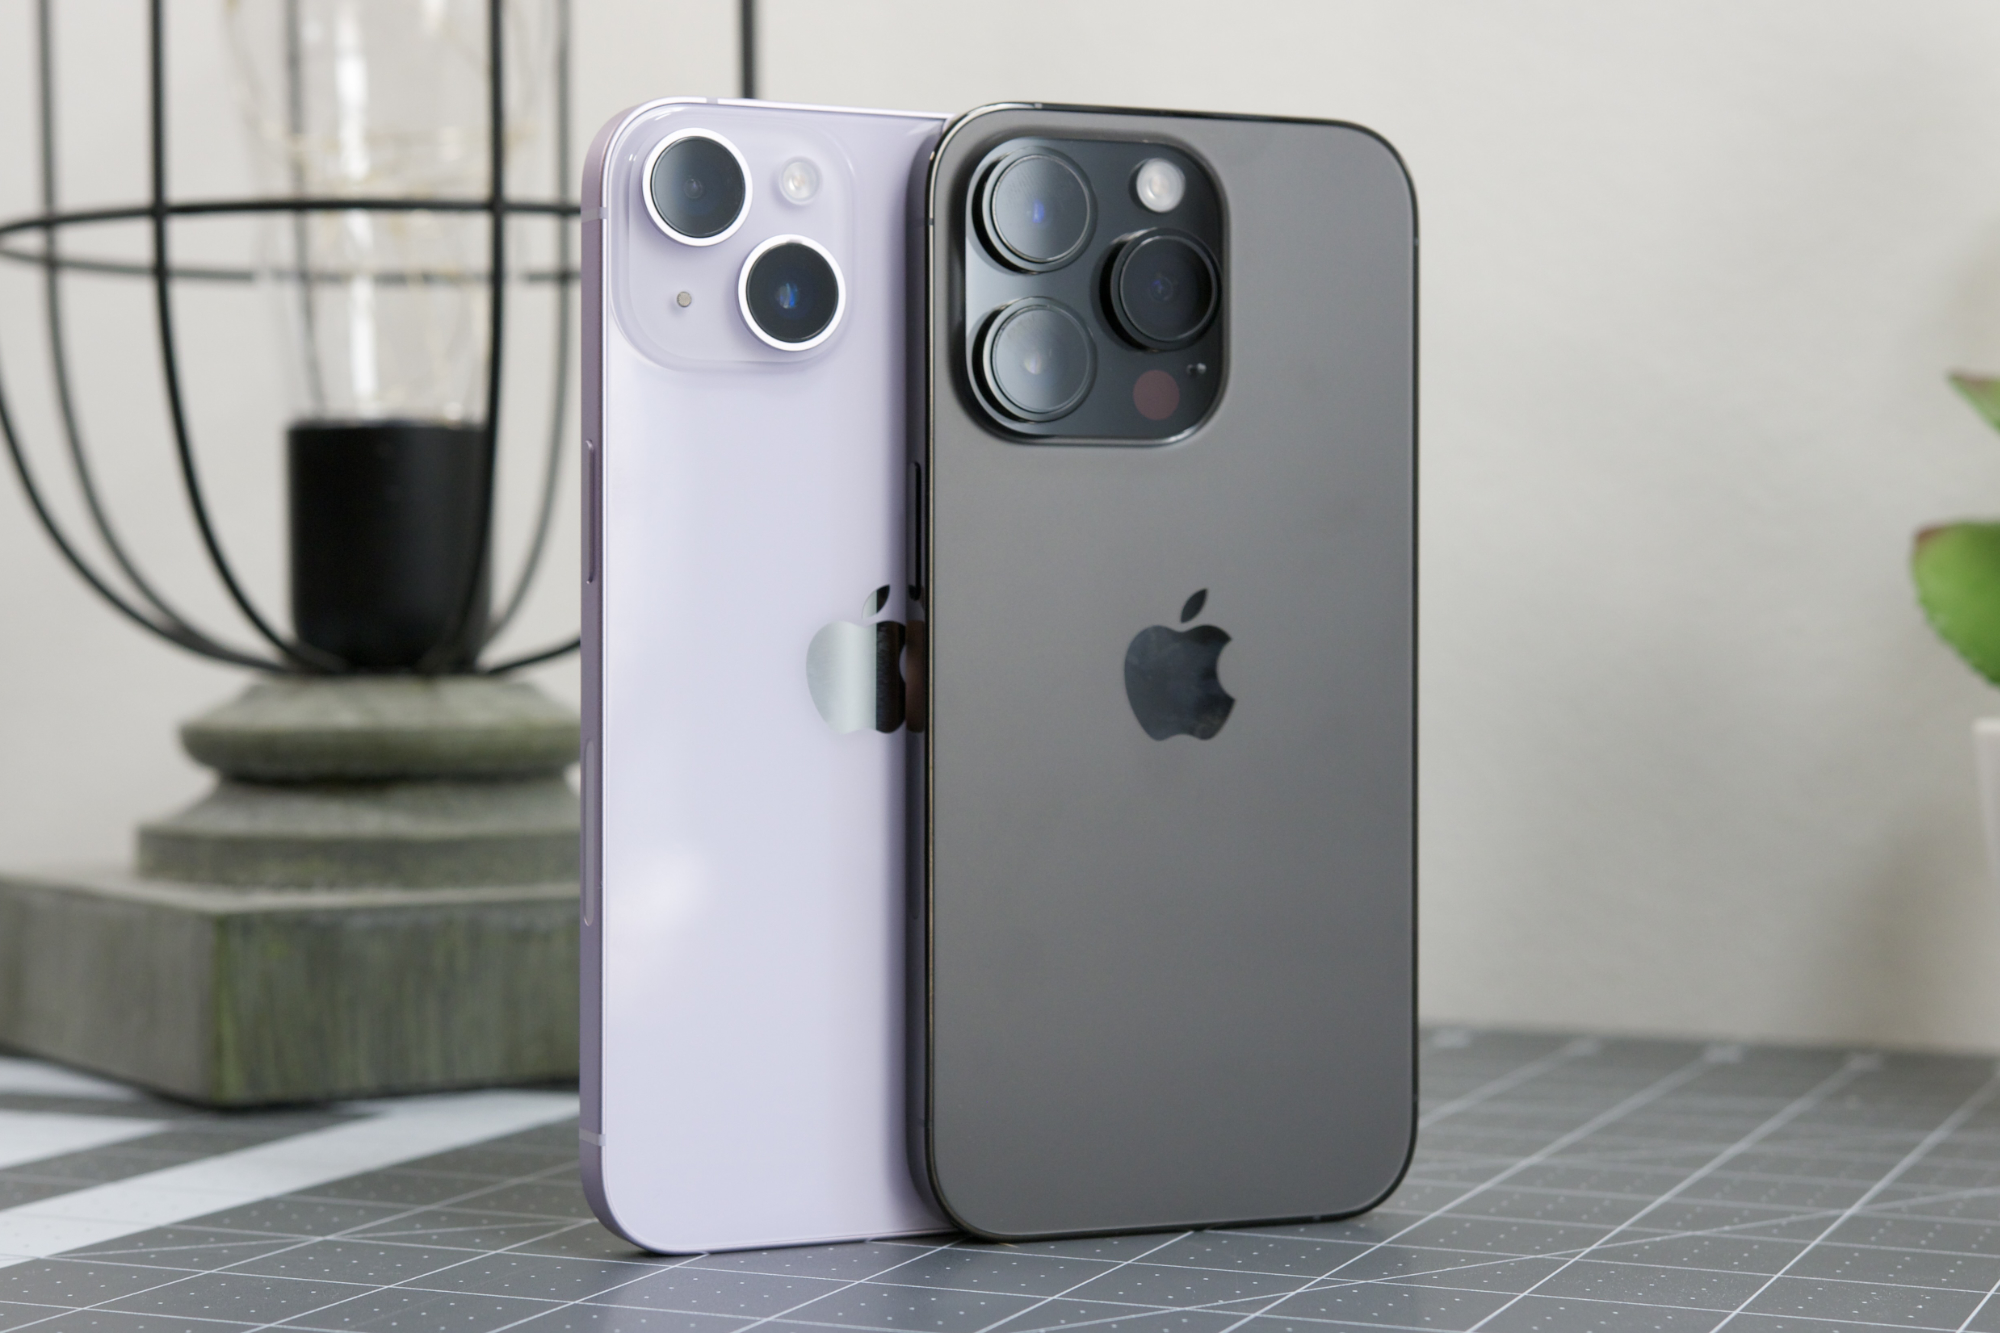 Which iPhone 14 has 3 cameras?